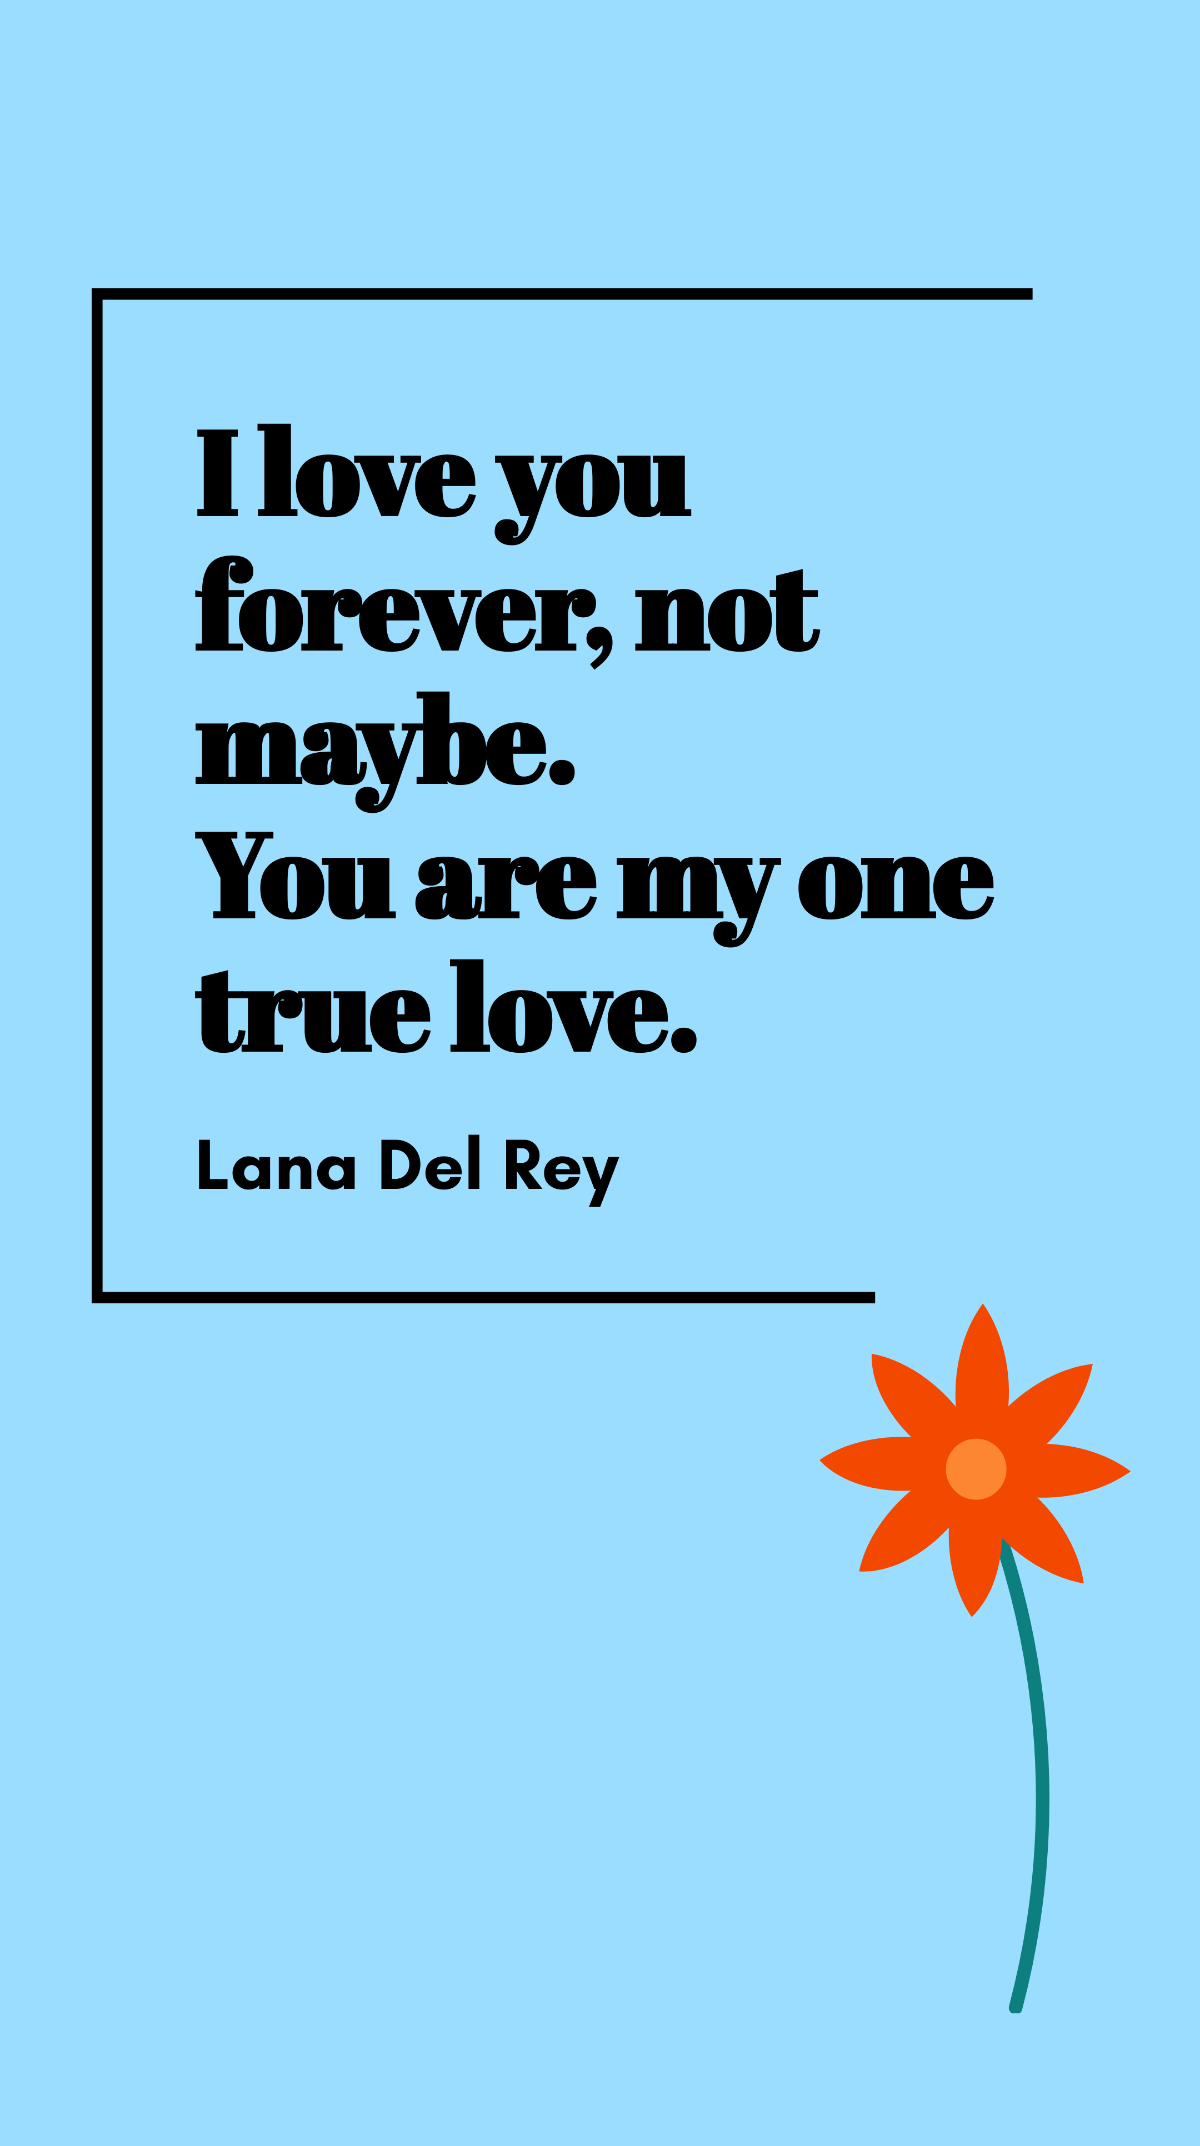 Free Lana Del Rey - I love you forever, not maybe. You are my one true love. Template